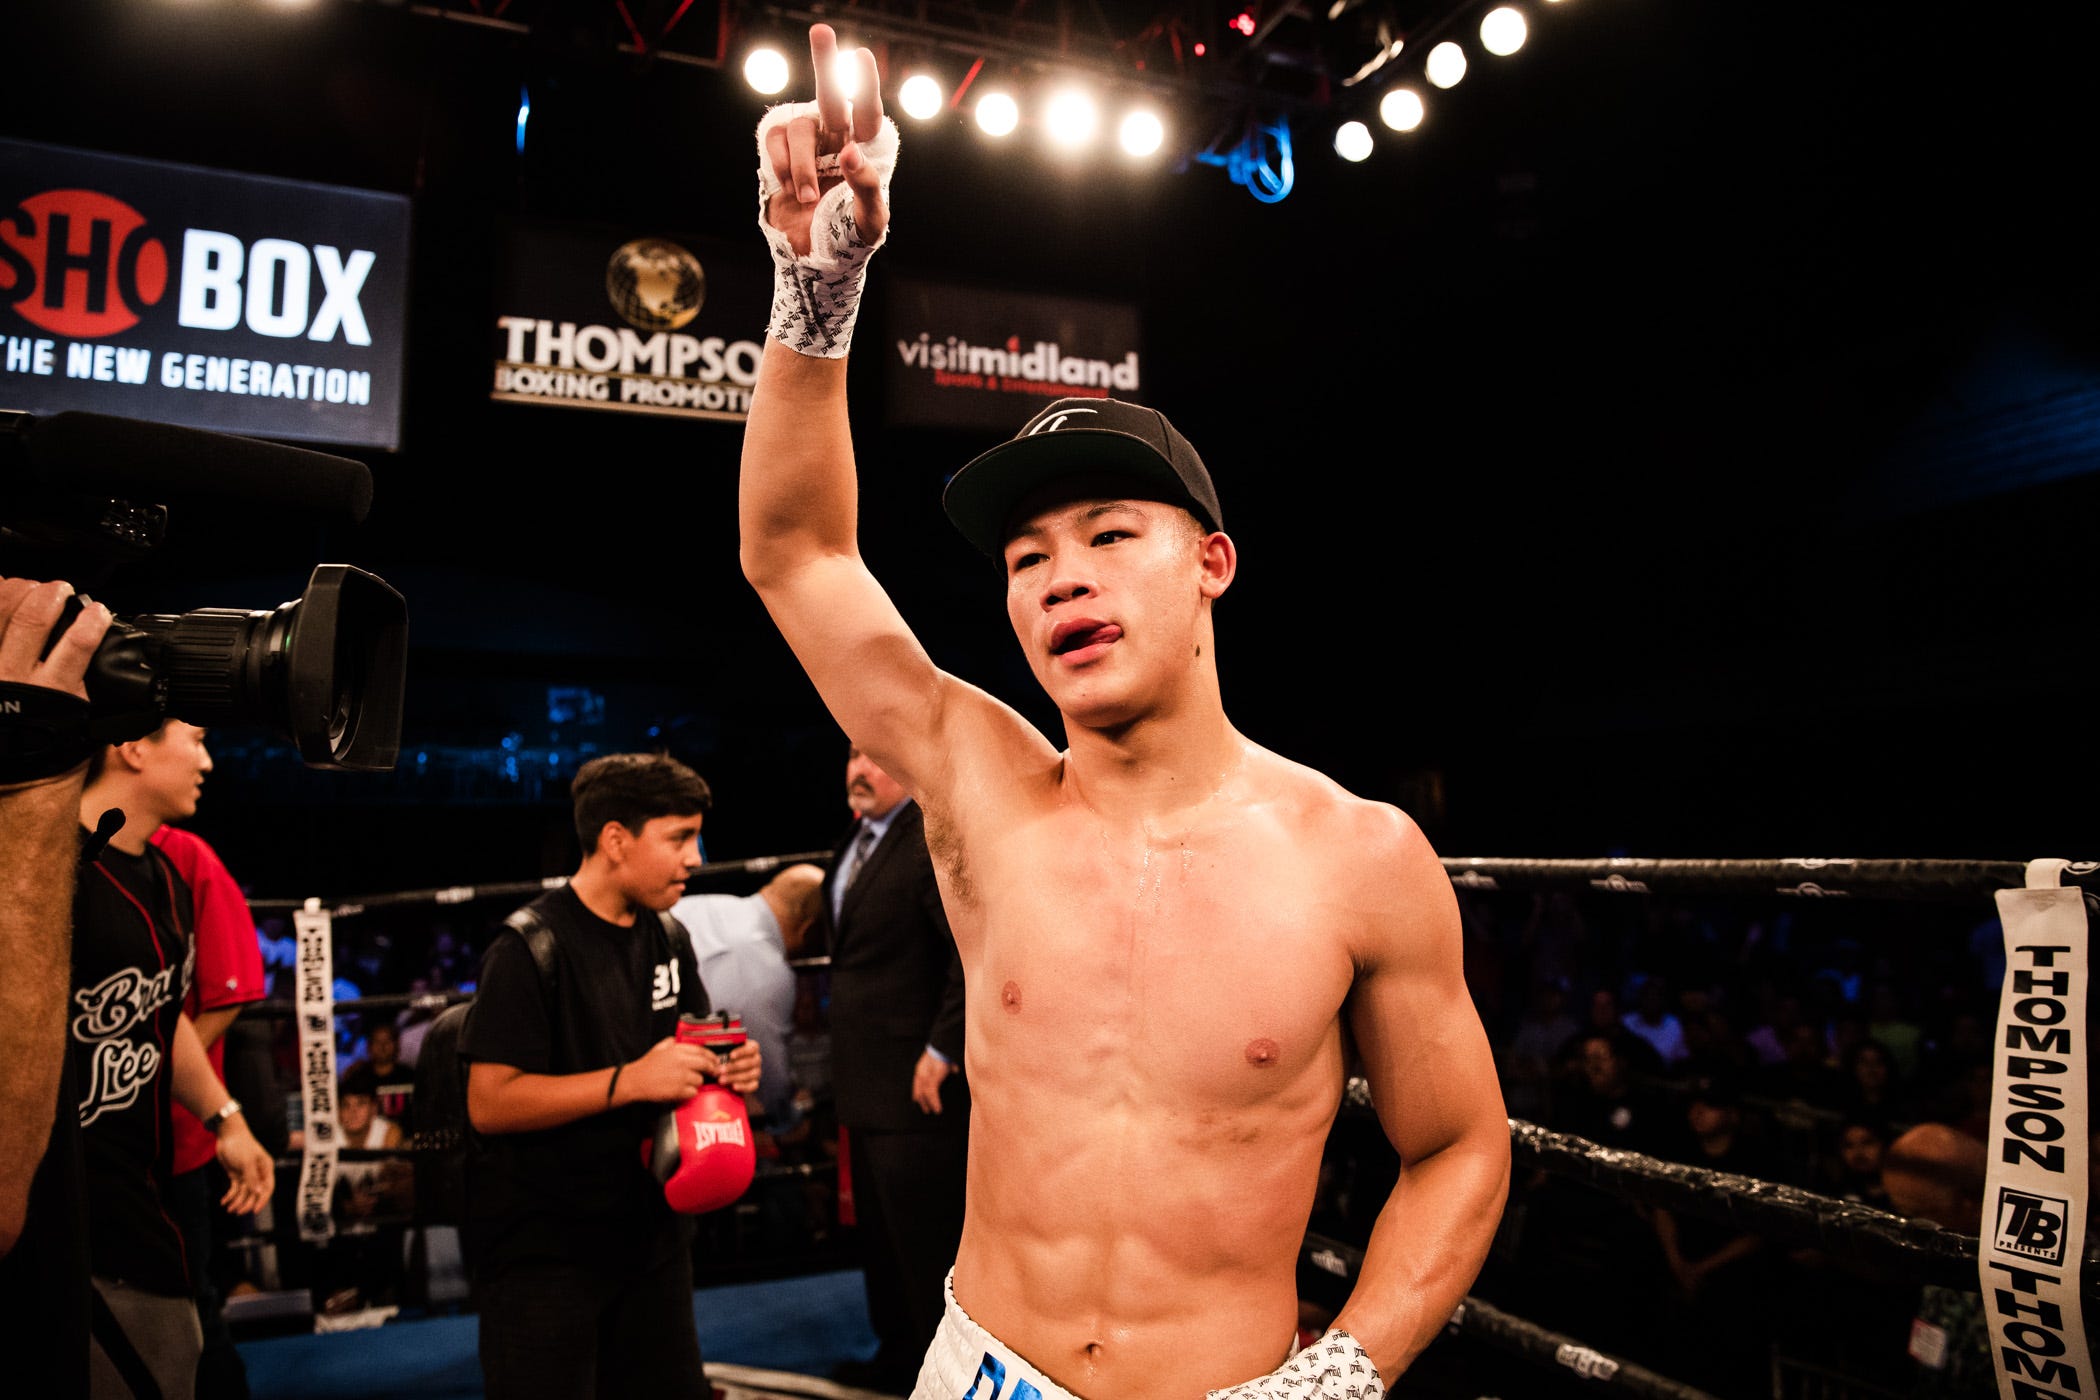 La Quinta's Brandun Lee remains unbeaten with first-round knockout